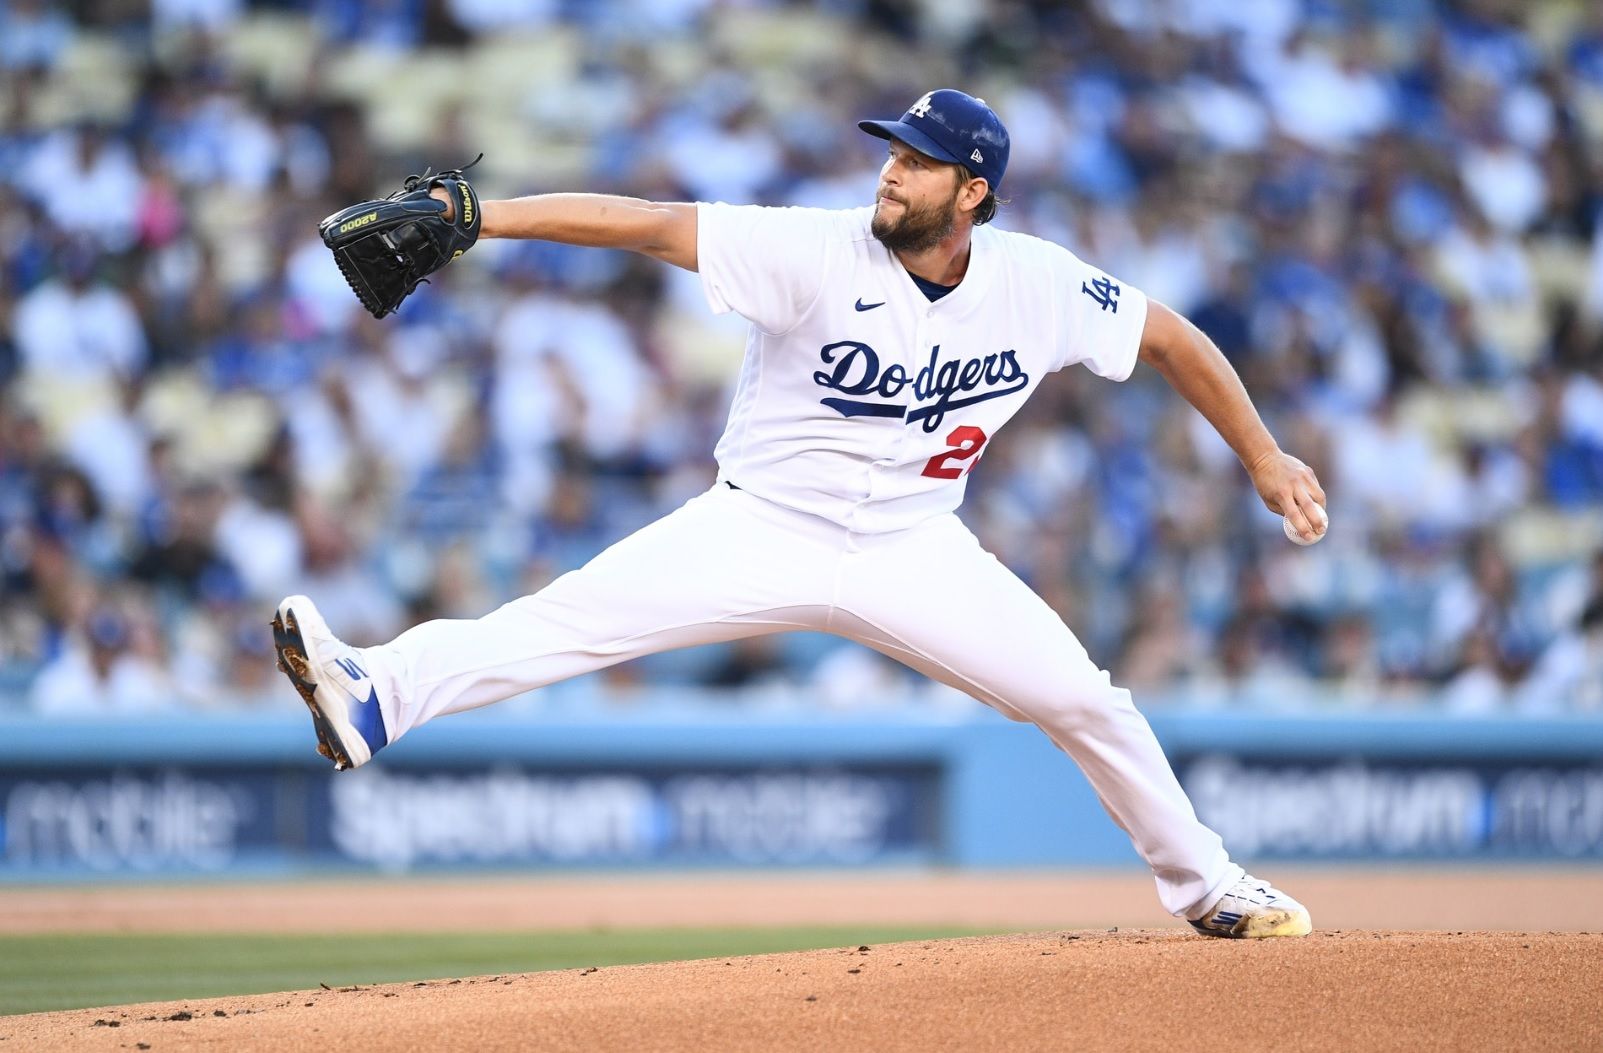 Kershaw strikes out 10 in Dodgers' 4-2 win over Cubs